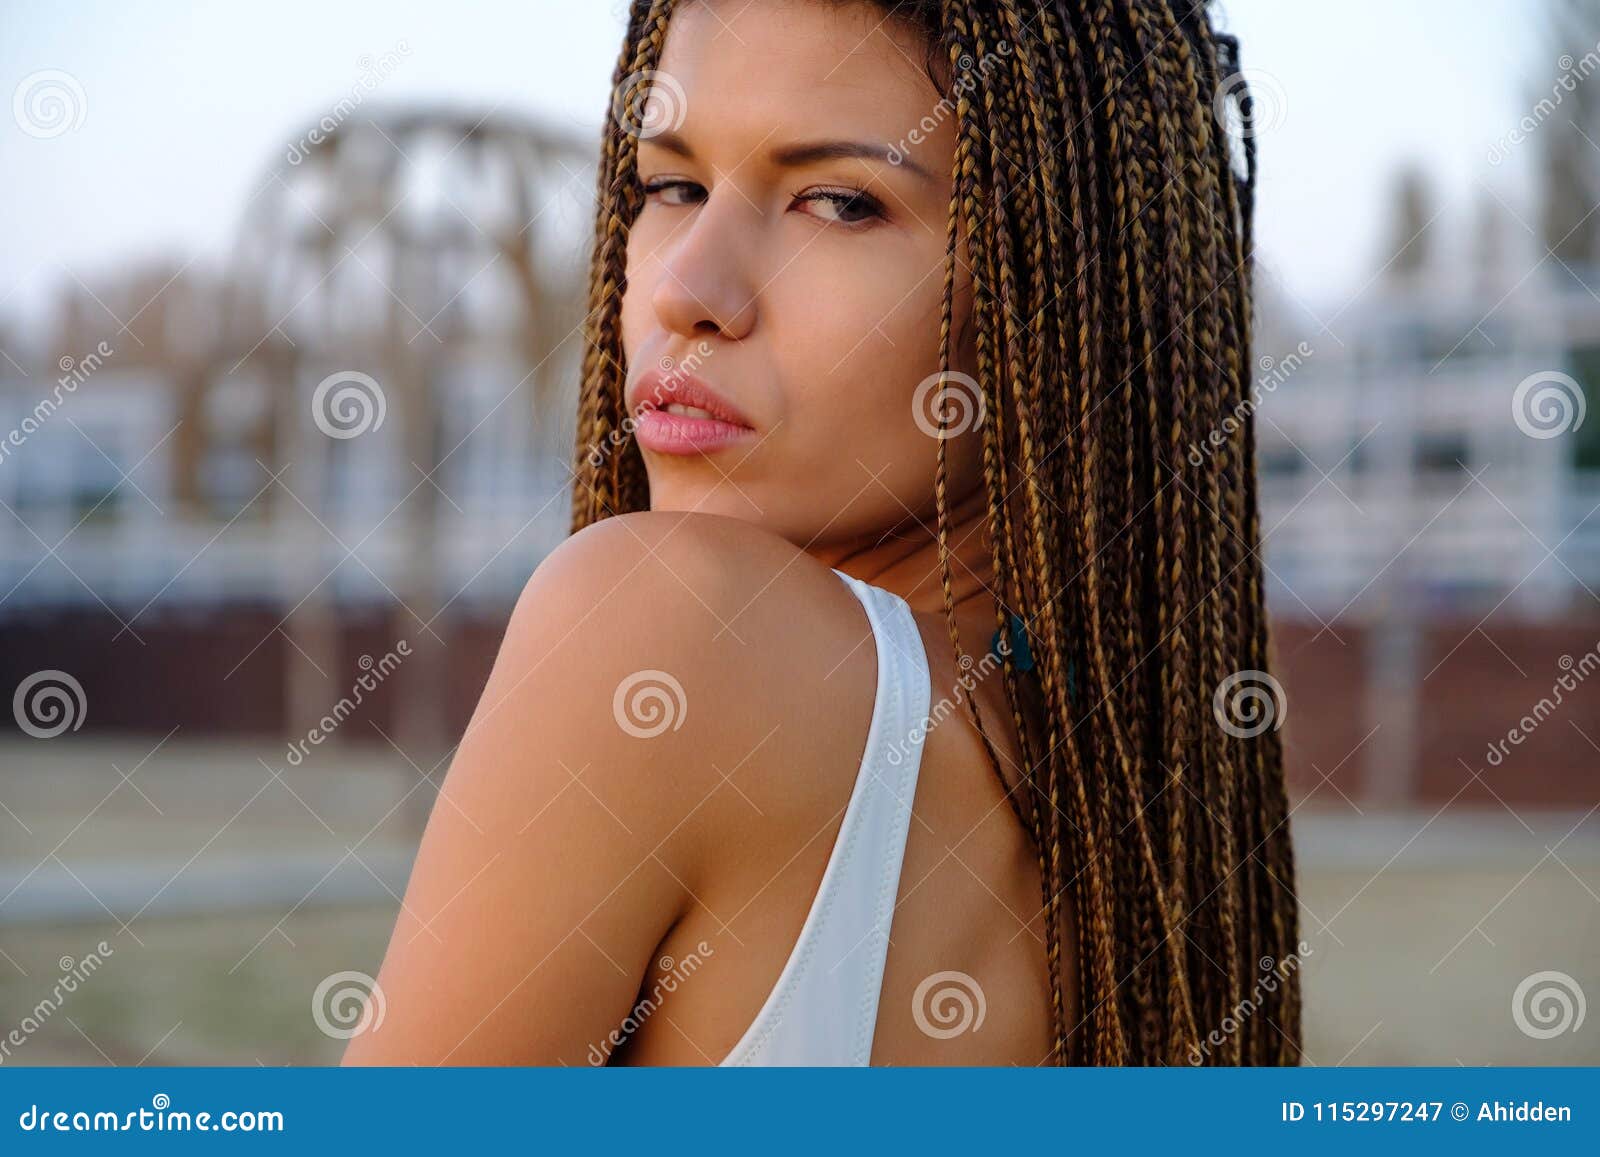 Portrait Of Attractive Asian Model Girl With Braided Hairstyle Stock Image Image Of Asian